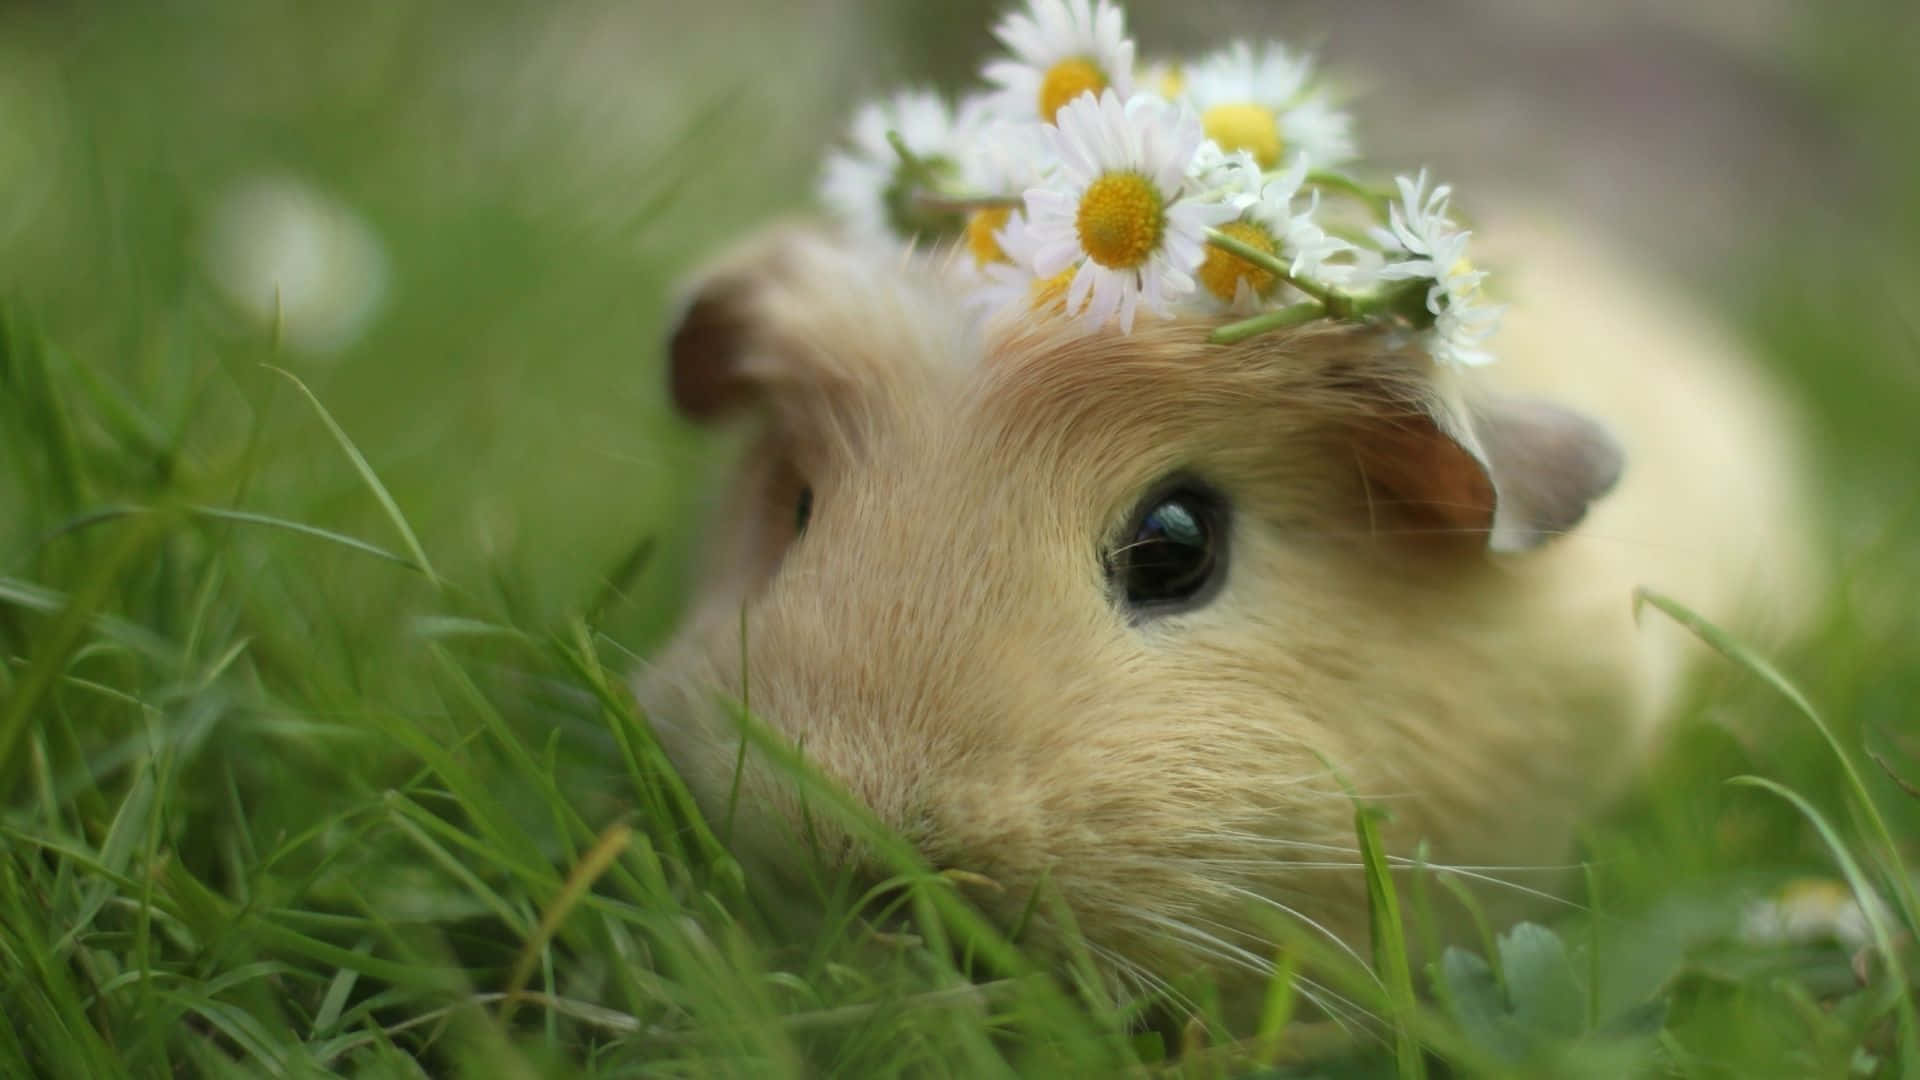 Check out this adorable guinea pig!